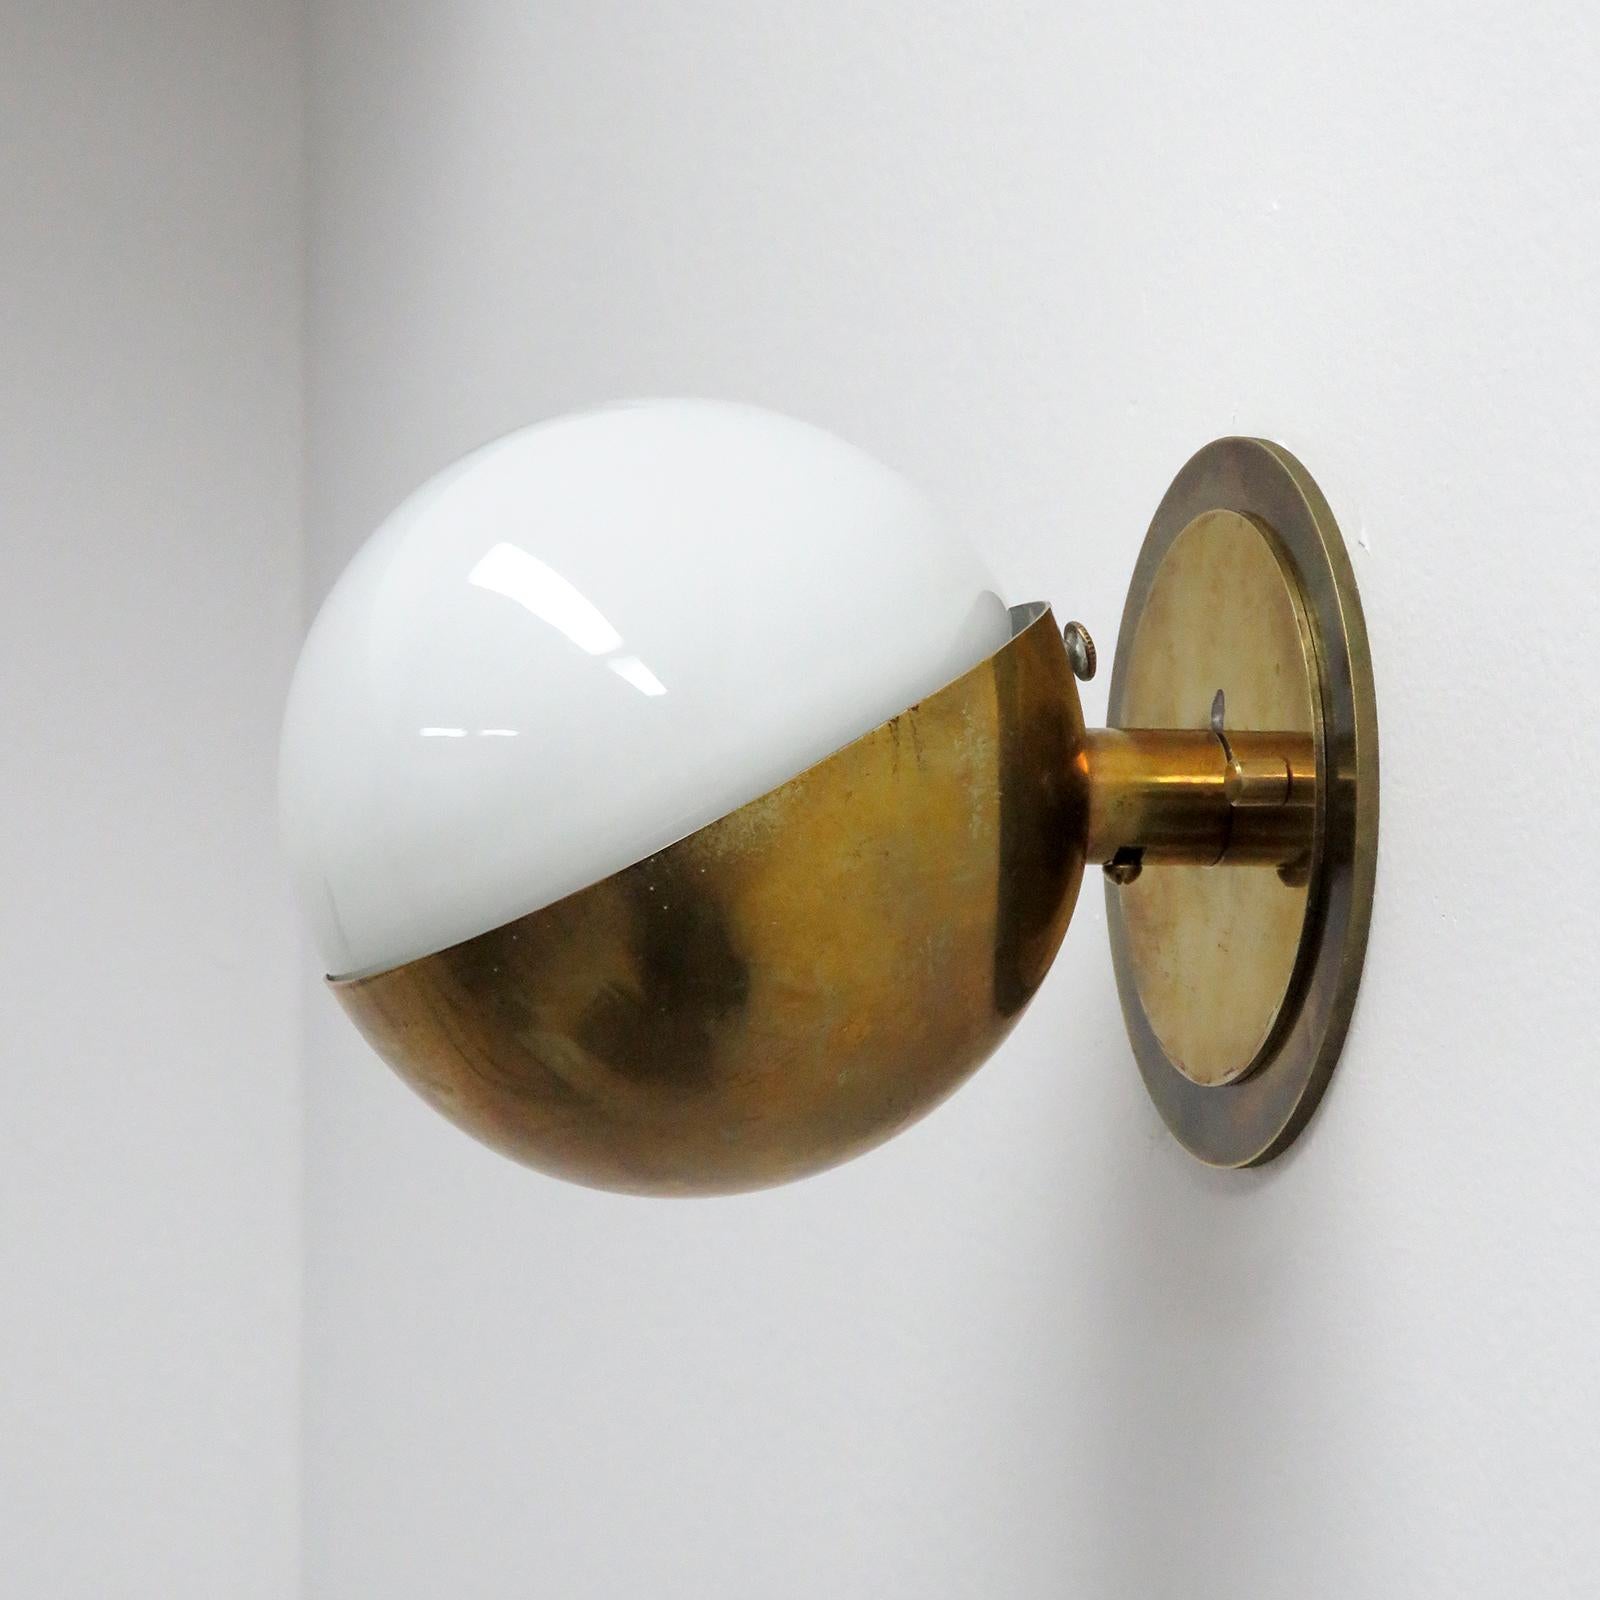 Remarkable small 'Radiohuset' wall light, by Vilhelm Lauritzen for Louis Poulsen, in patinaed brass and opaline glass designed in 1931 for the Broadcasting House in Copenhagen.
 